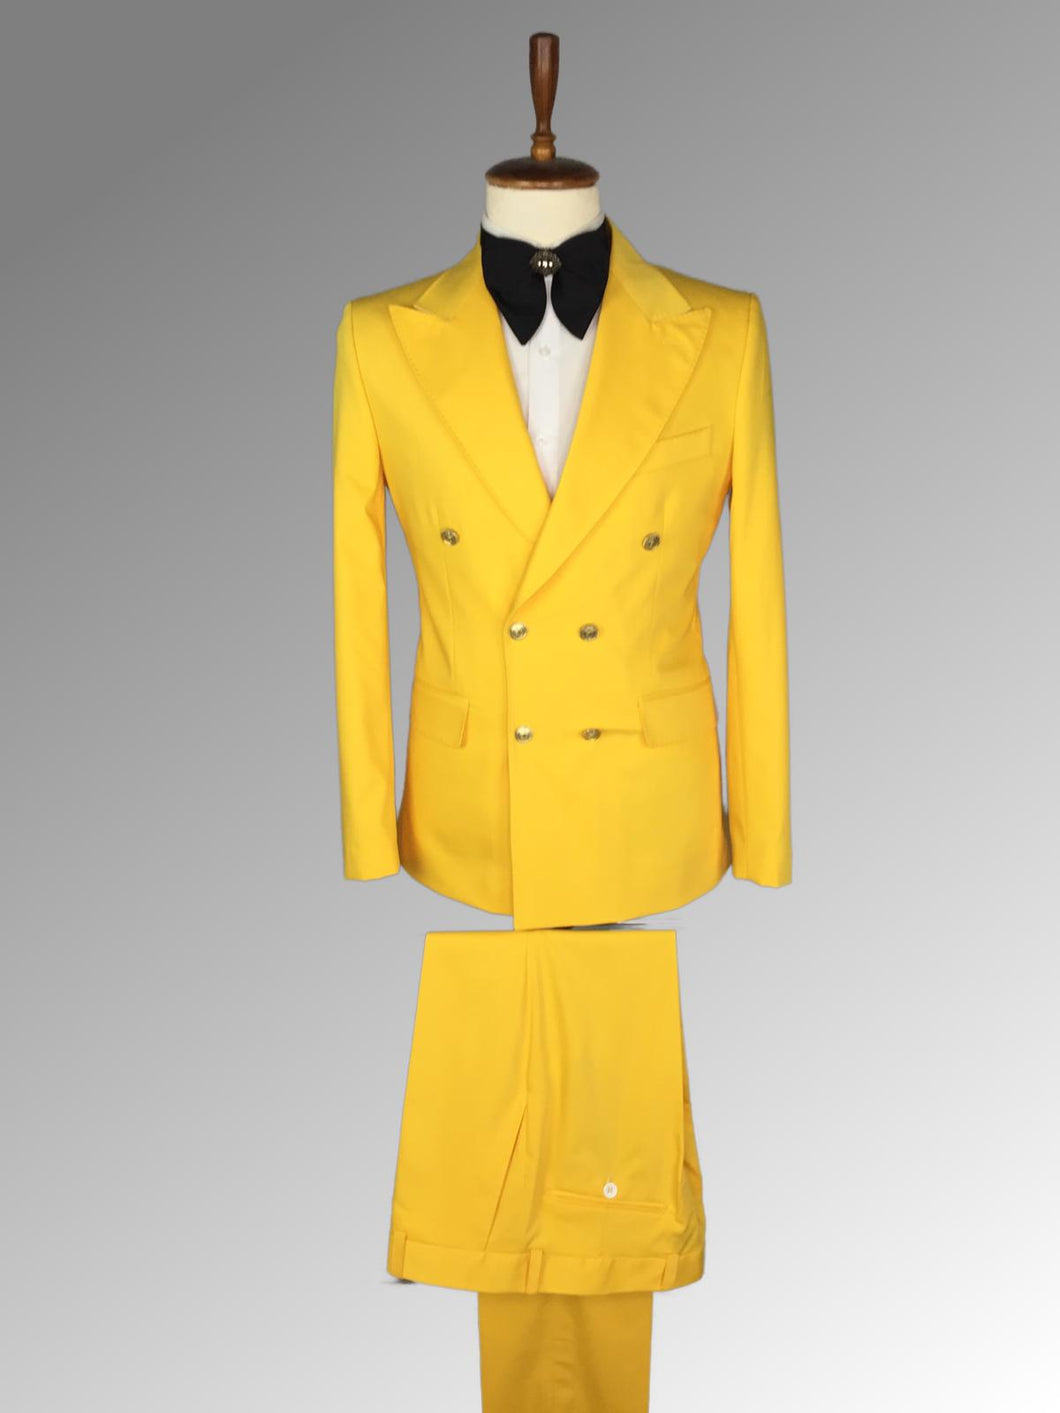 Men’s Yellow double breasted suit